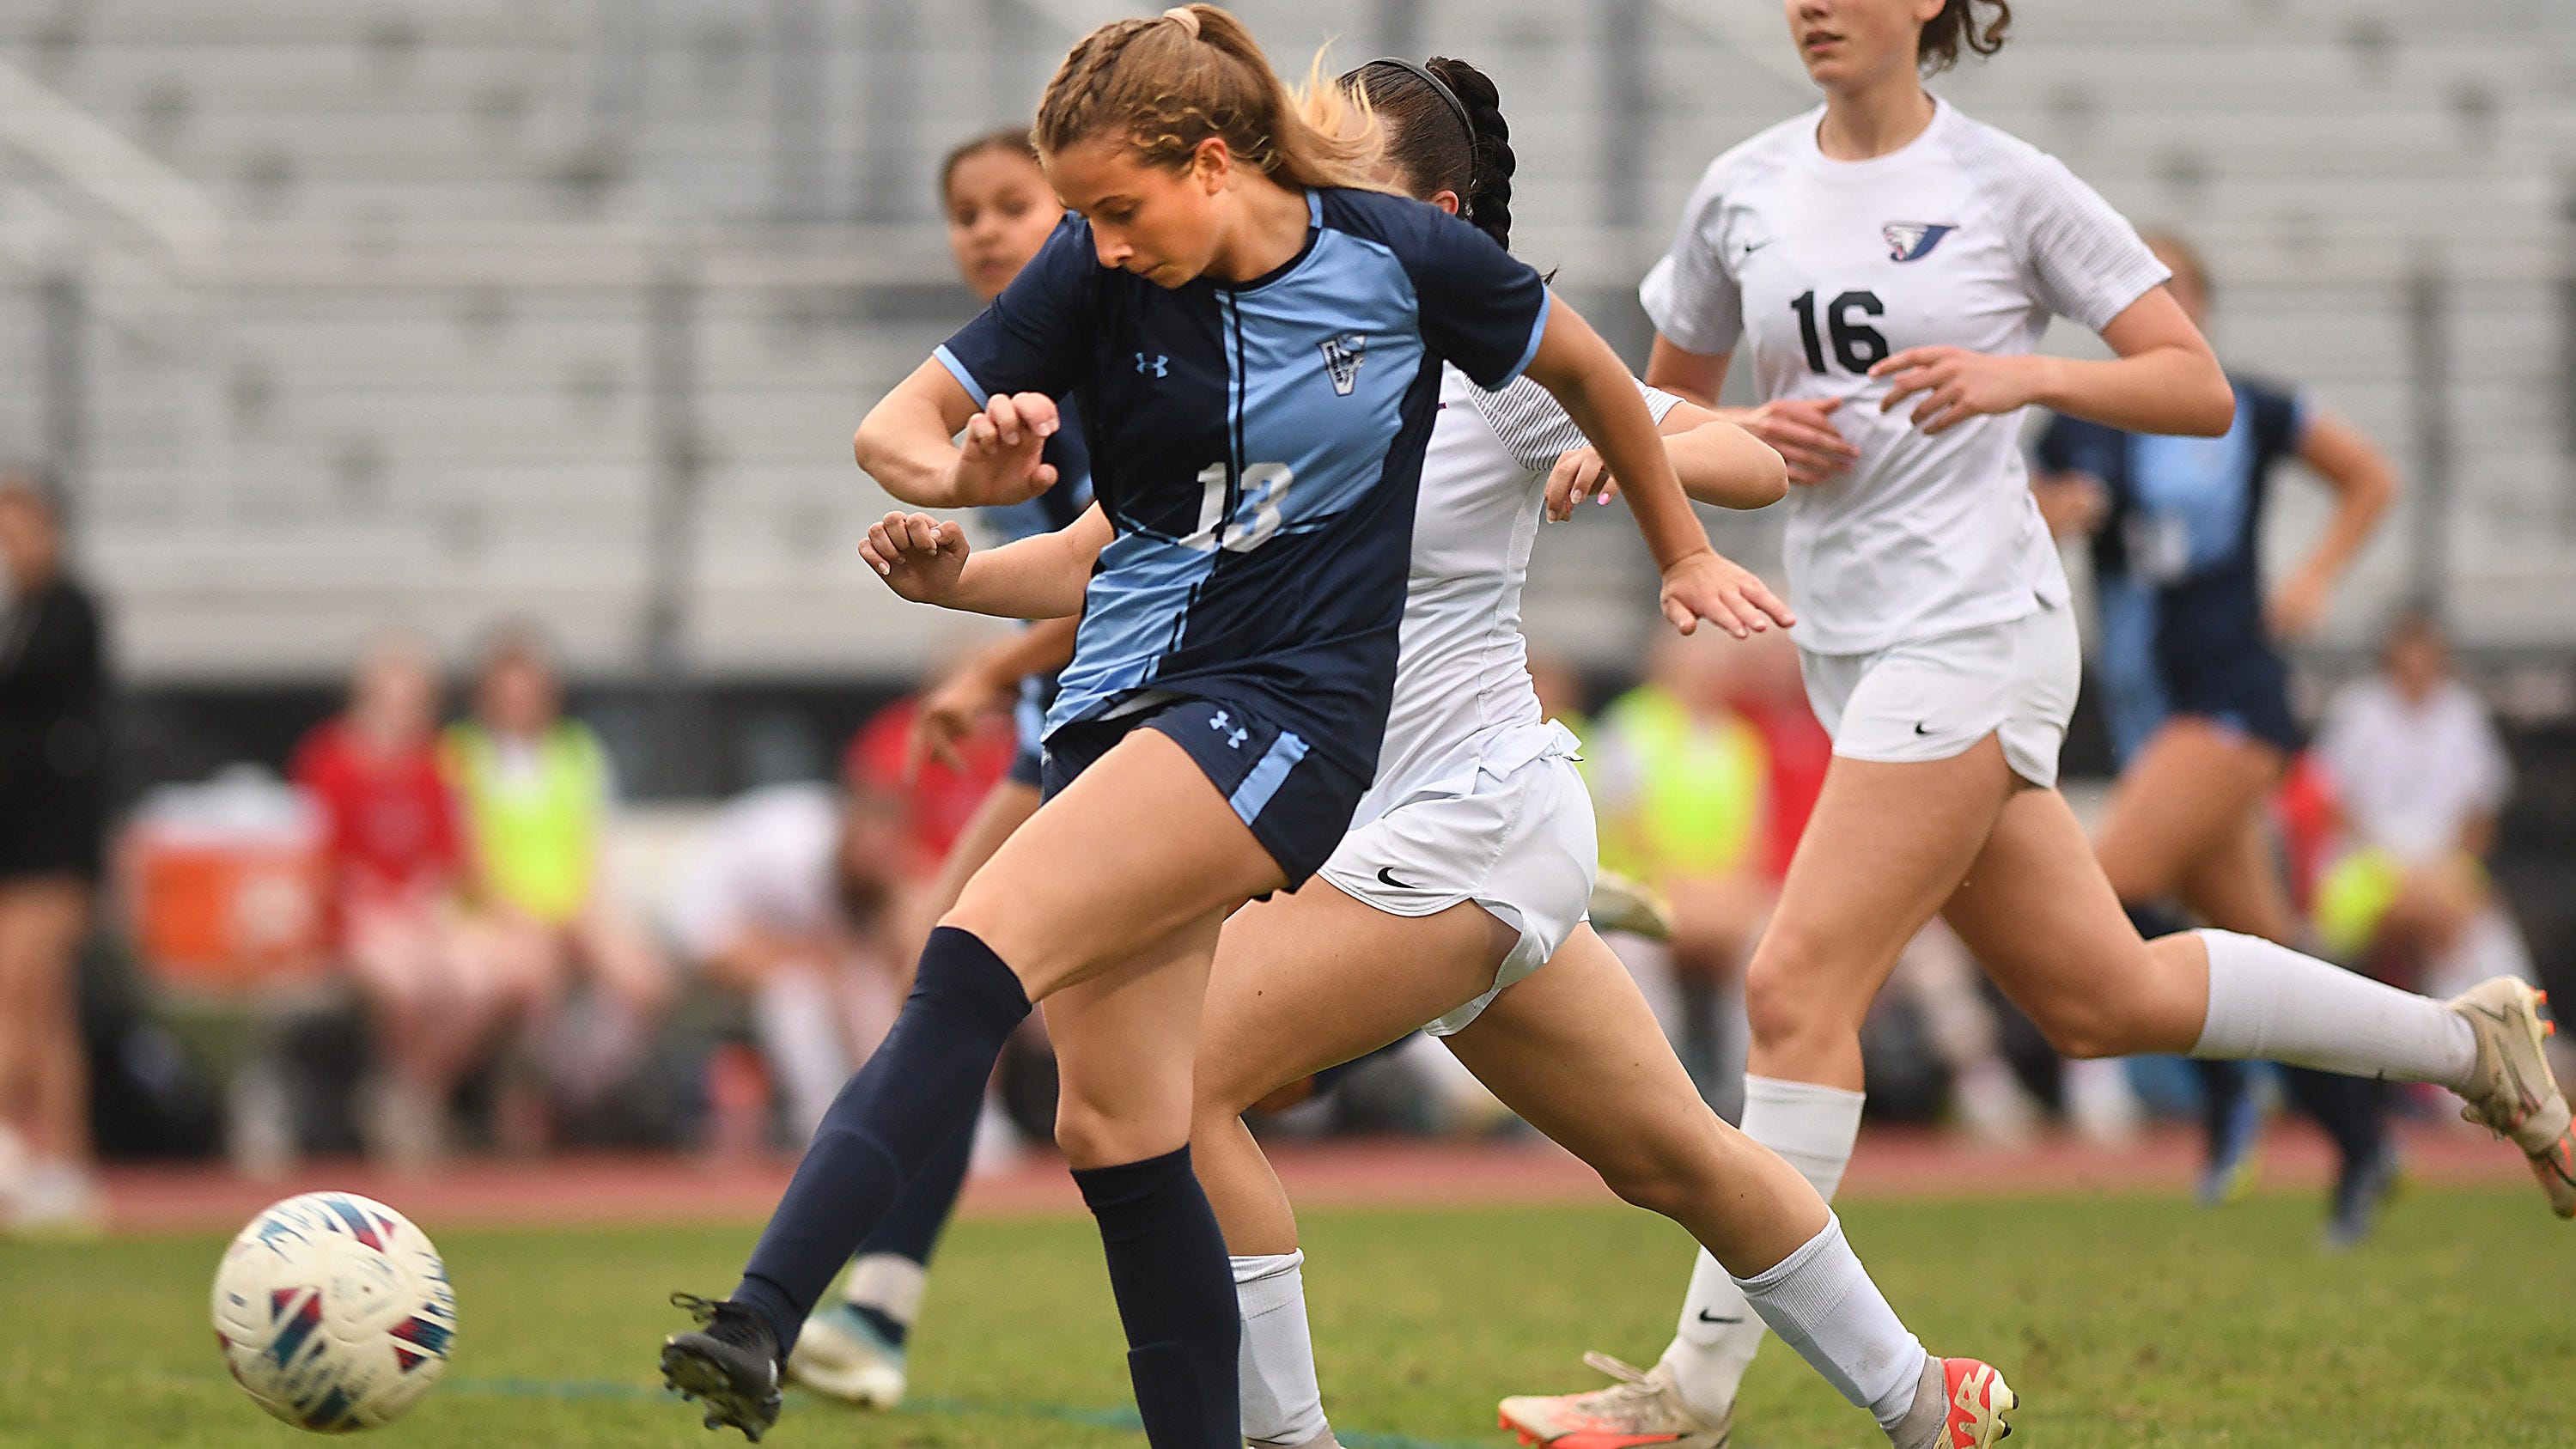 PHOTOS: Hoggard vs. Jordan in the first round of the playoff’s.